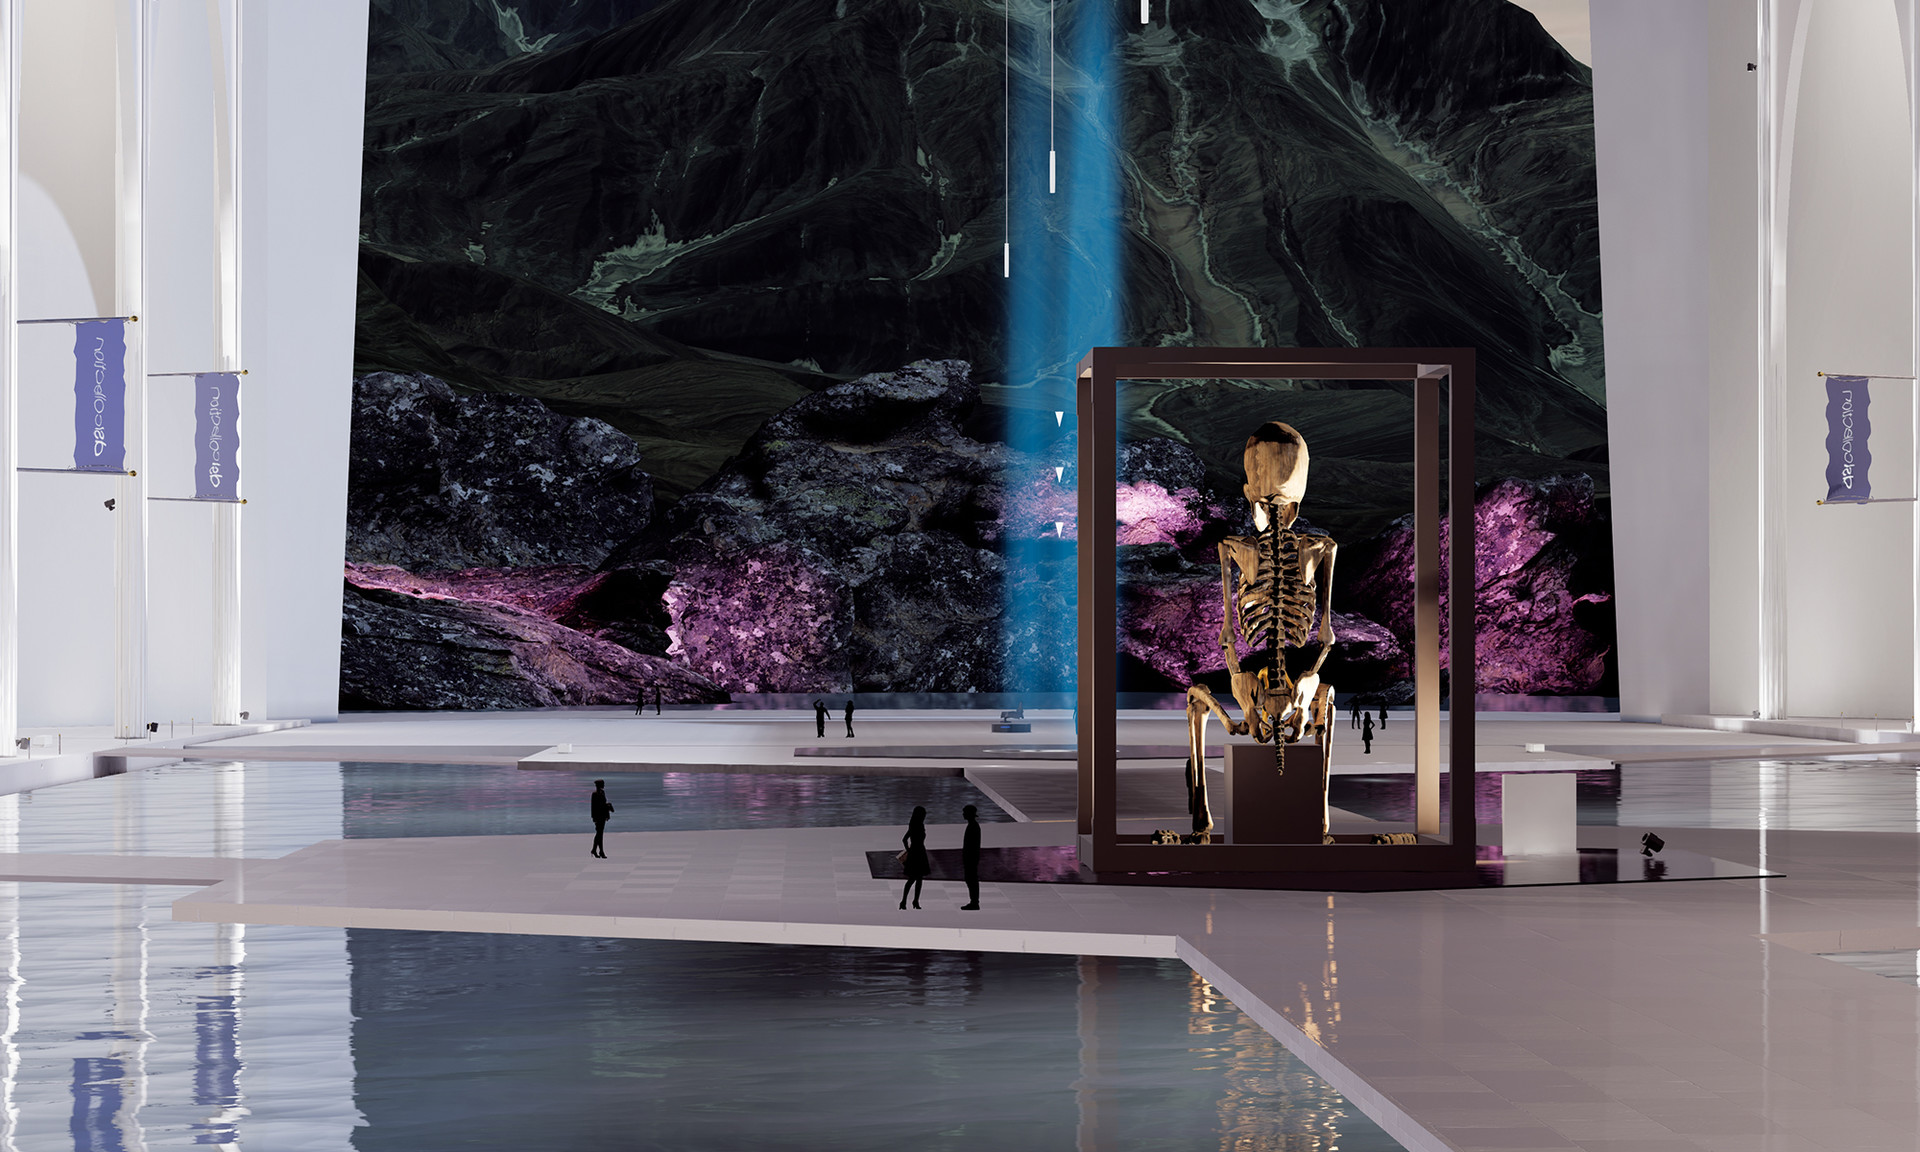 A digital rendering of a large white gallery space with a pool and a landscape mural, and a sculpture in a wooden box